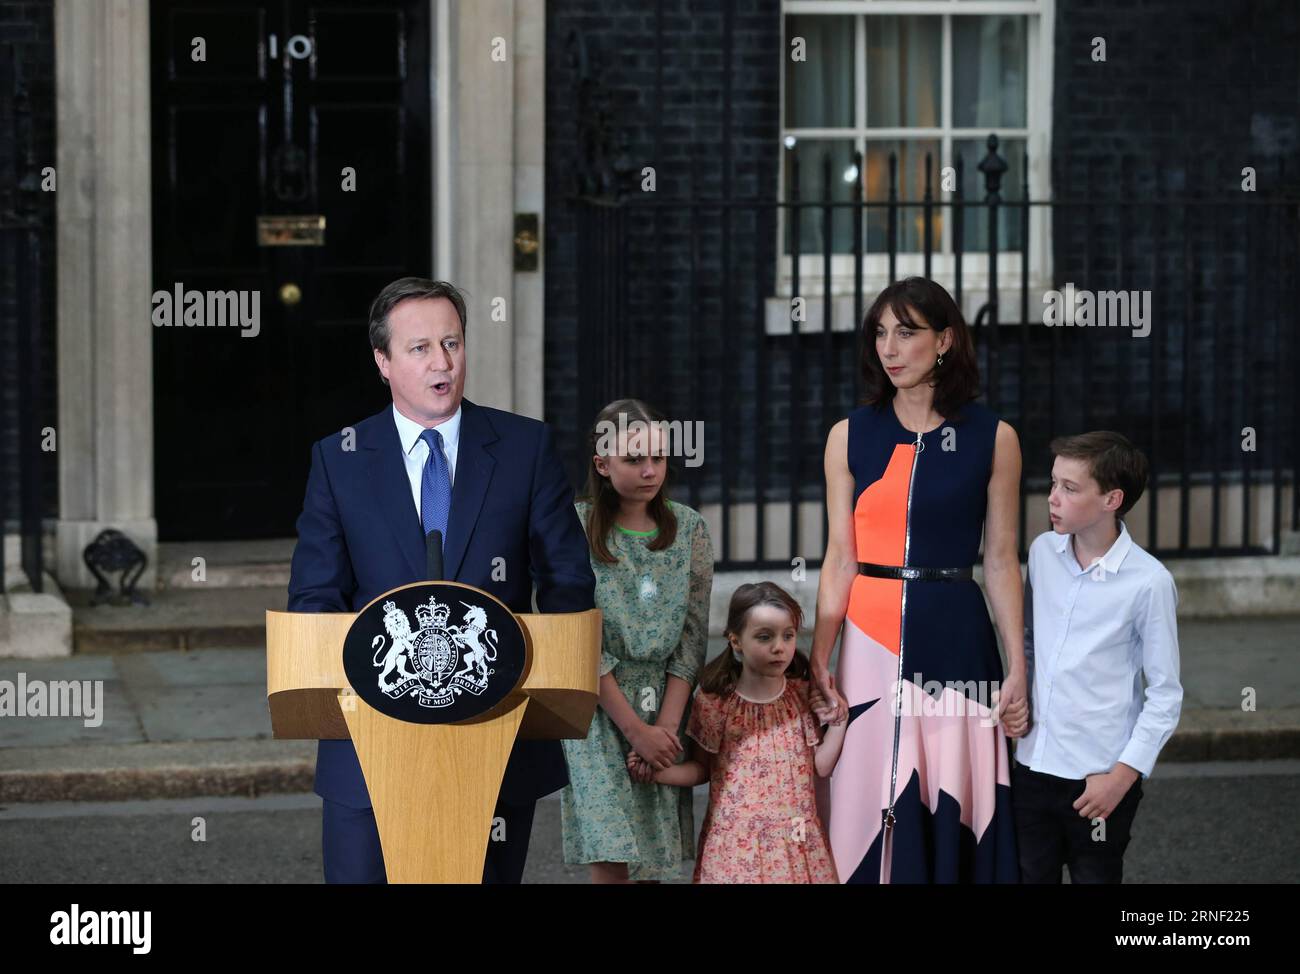 (160713) -- LONDON, JULY 13, 2016 -- British outgoing Prime Minister David Cameron(1st L) gives a speech with his family before leaving 10 Downing Street in London, Britain on July 13, 2016. Cameron bid farewell to 10 Downing Street and headed to Buckingham Palace to offer his resignation to Queen Elizabeth II on Wednesday afternoon. ) BRITAIN-LONDON-DAVID CAMERON-RESIGNATION HanxYan PUBLICATIONxNOTxINxCHN   160713 London July 13 2016 British Outgoing Prime Ministers David Cameron 1st l Gives a Speech With His Family Before leaving 10 Downing Street in London Britain ON July 13 2016 Cameron BI Stock Photo